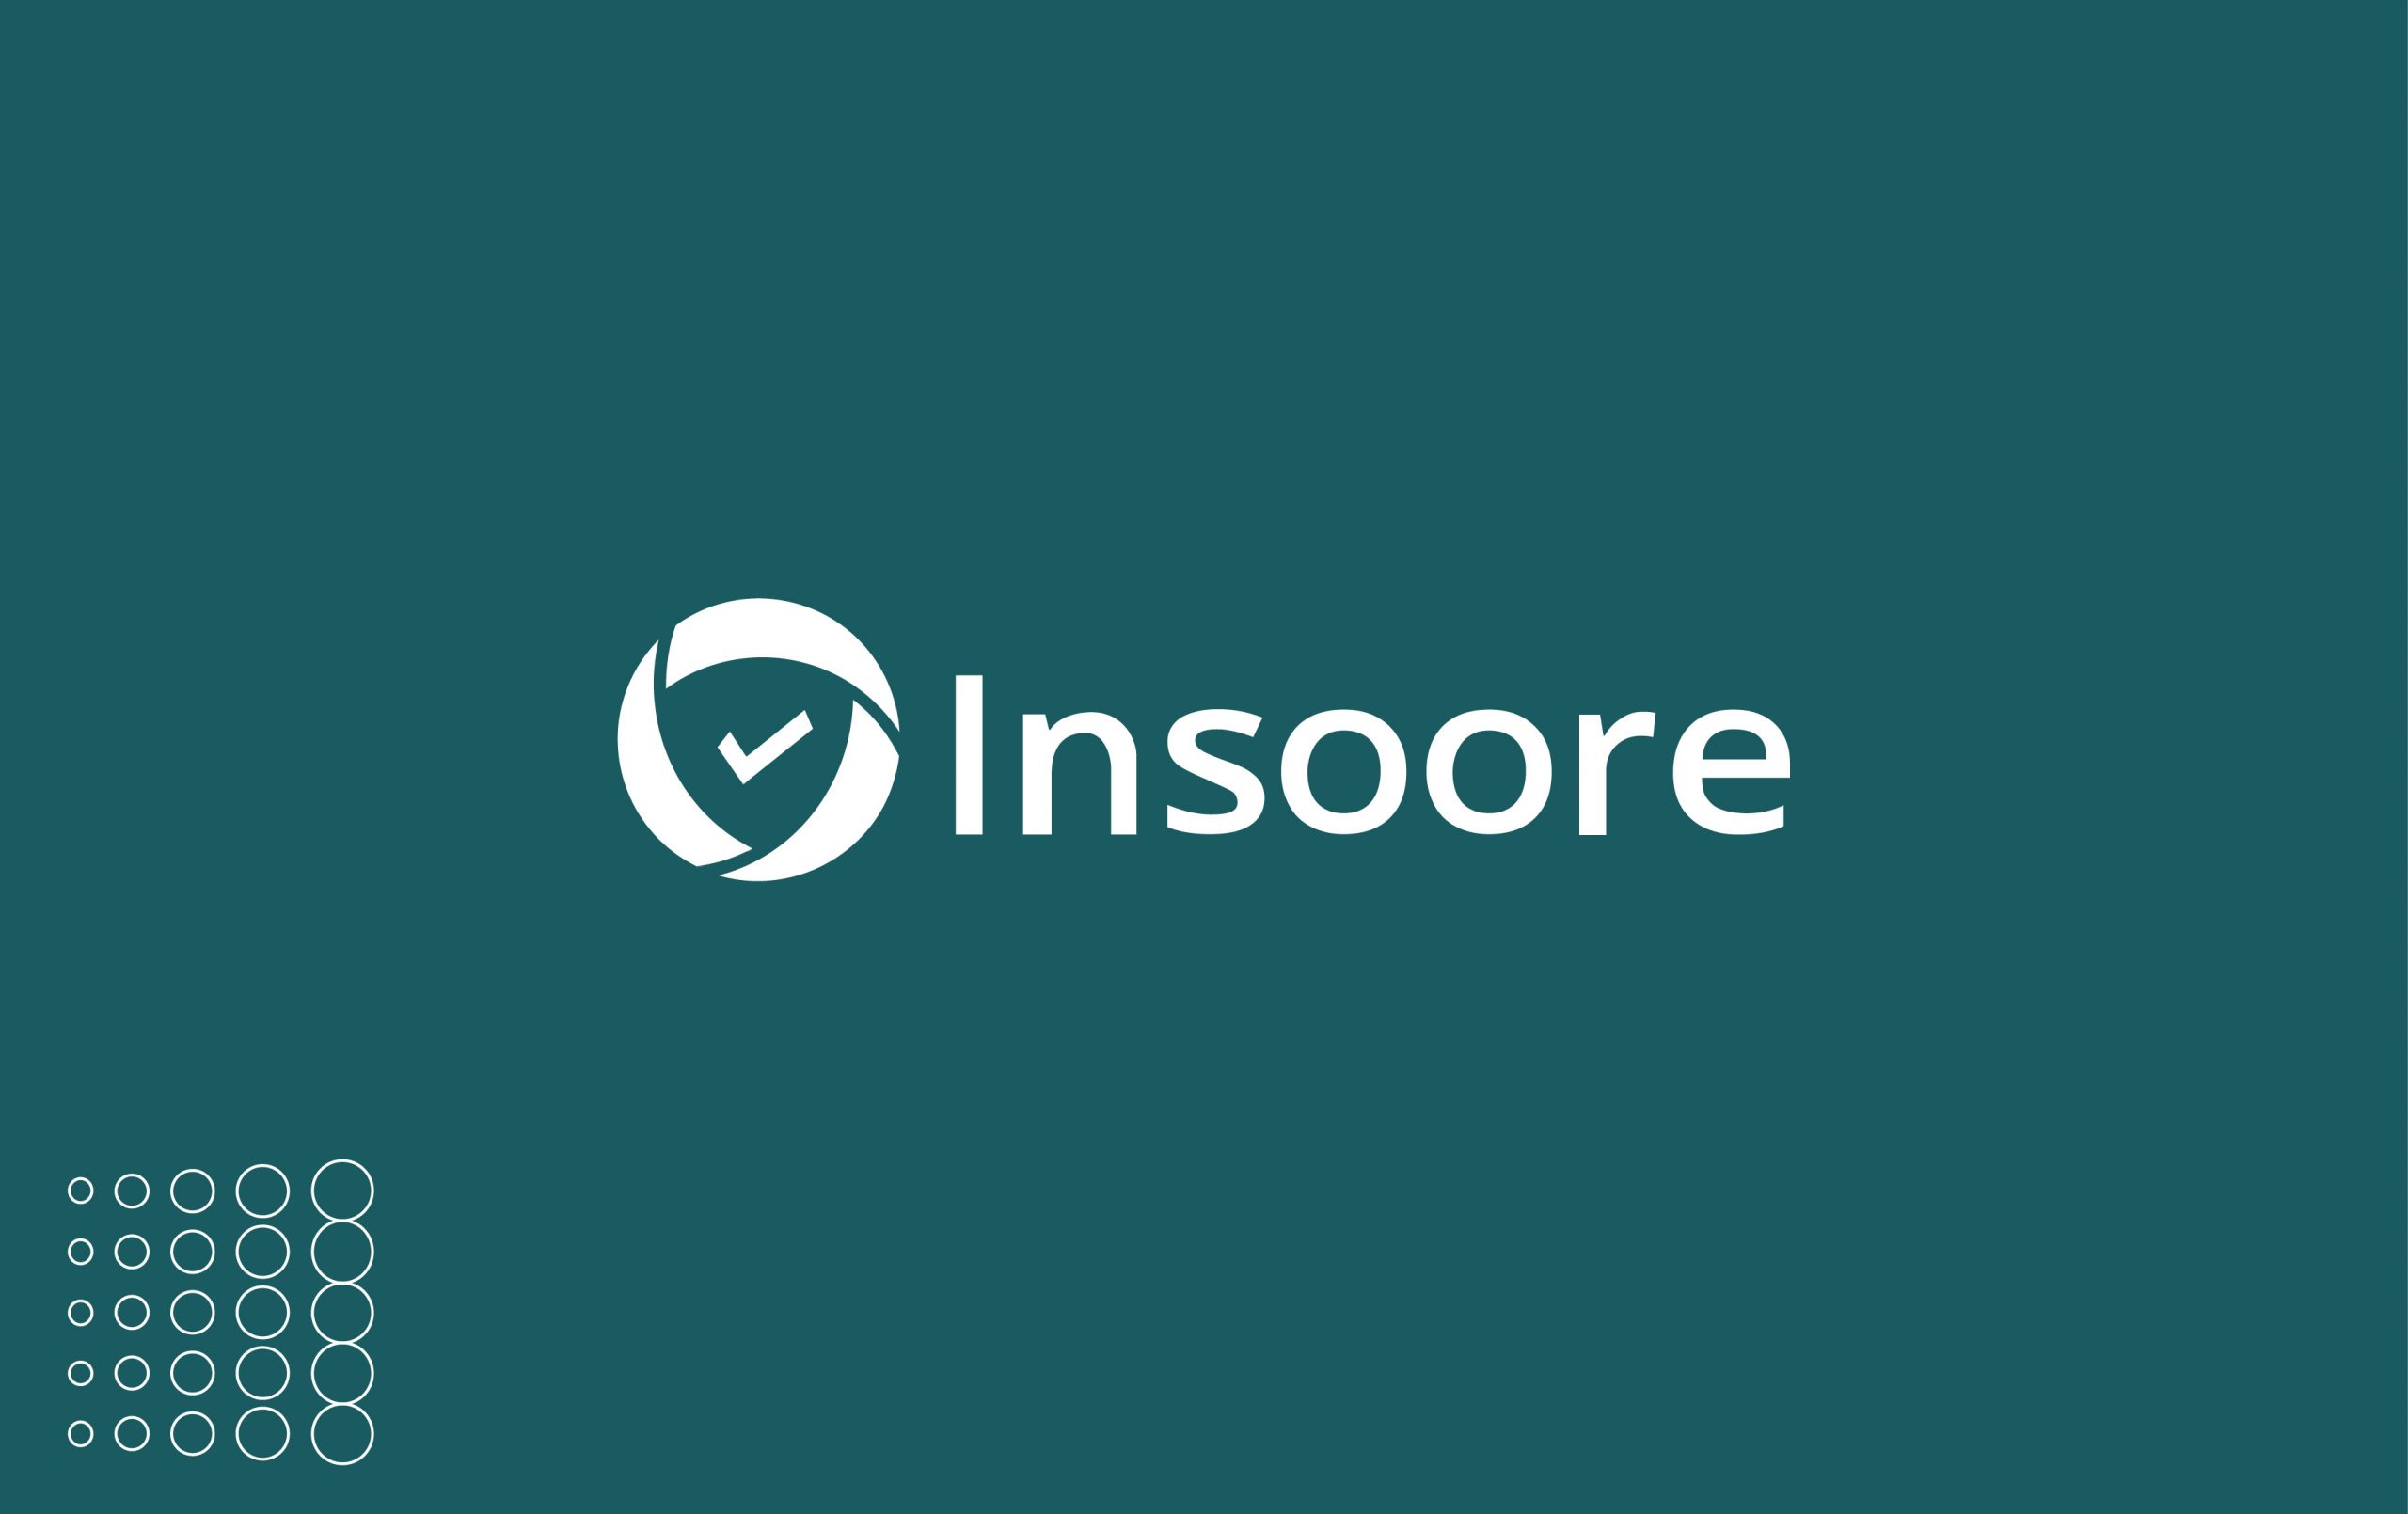 Insurtech, Insoore secures 5.5 million euros  in a capital increase round